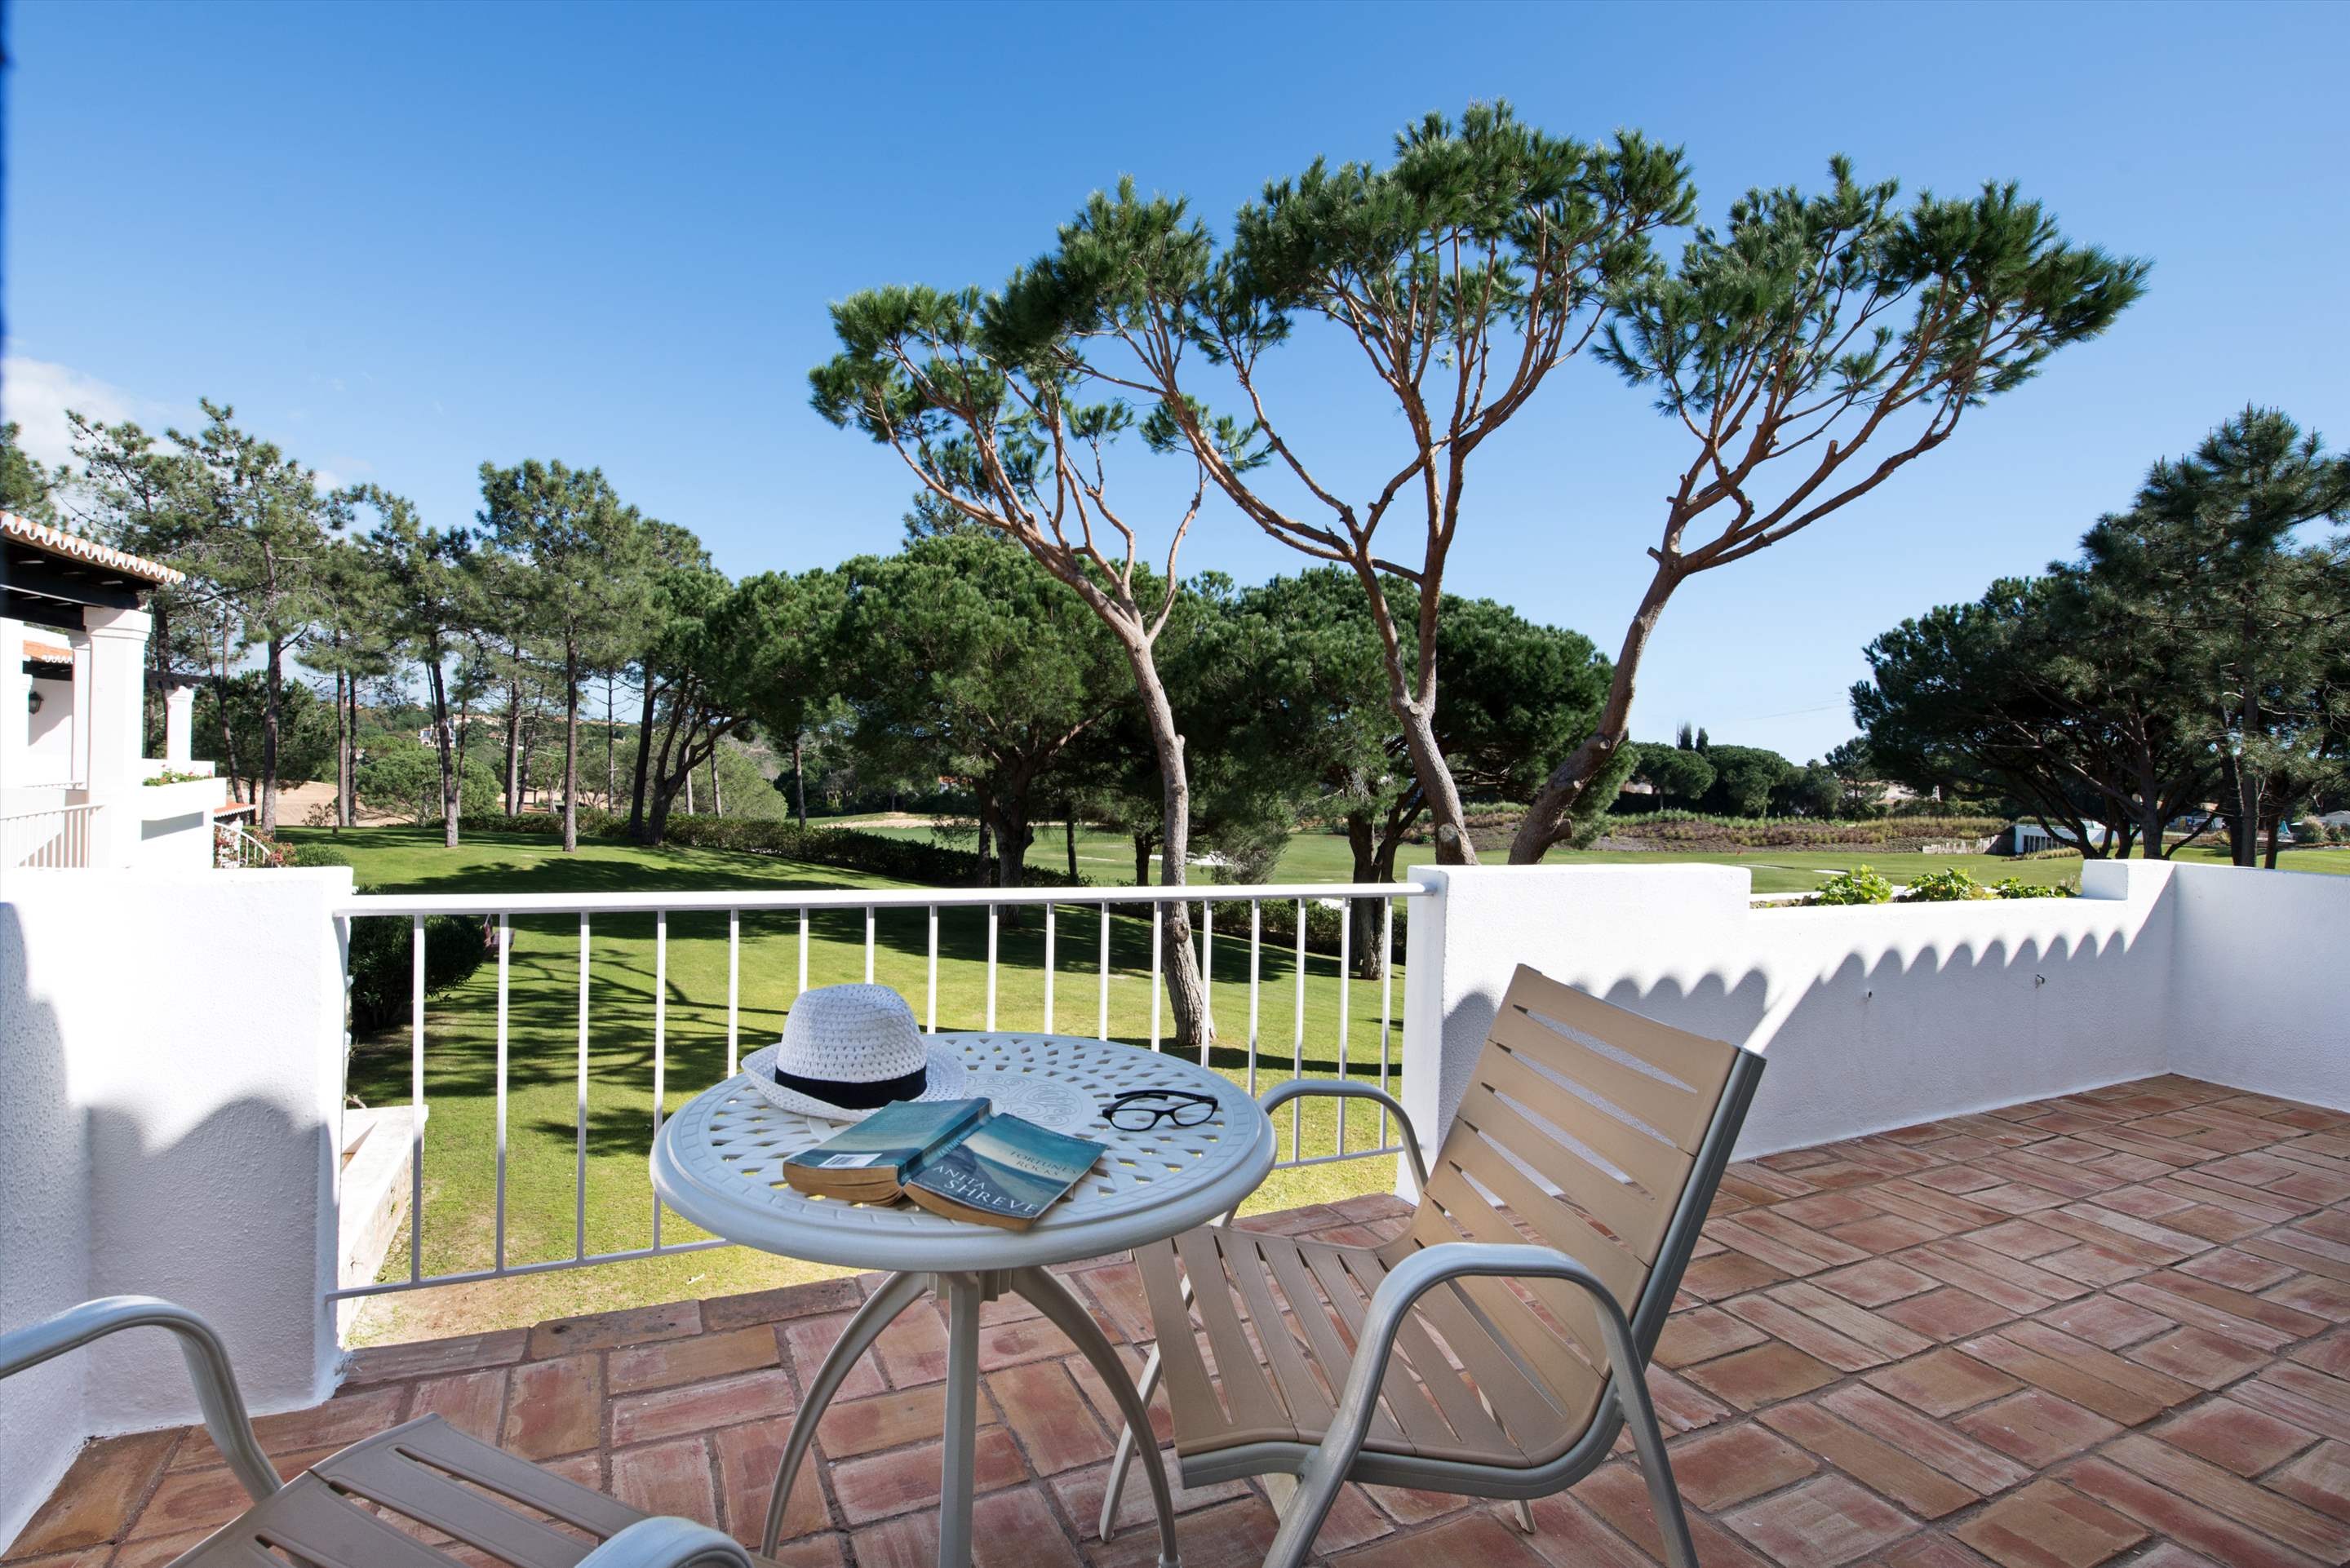 Four Seasons Country Club 2 bed, Superior - Sunday Arrival, 2 bedroom apartment in Four Seasons Country Club, Algarve Photo #9